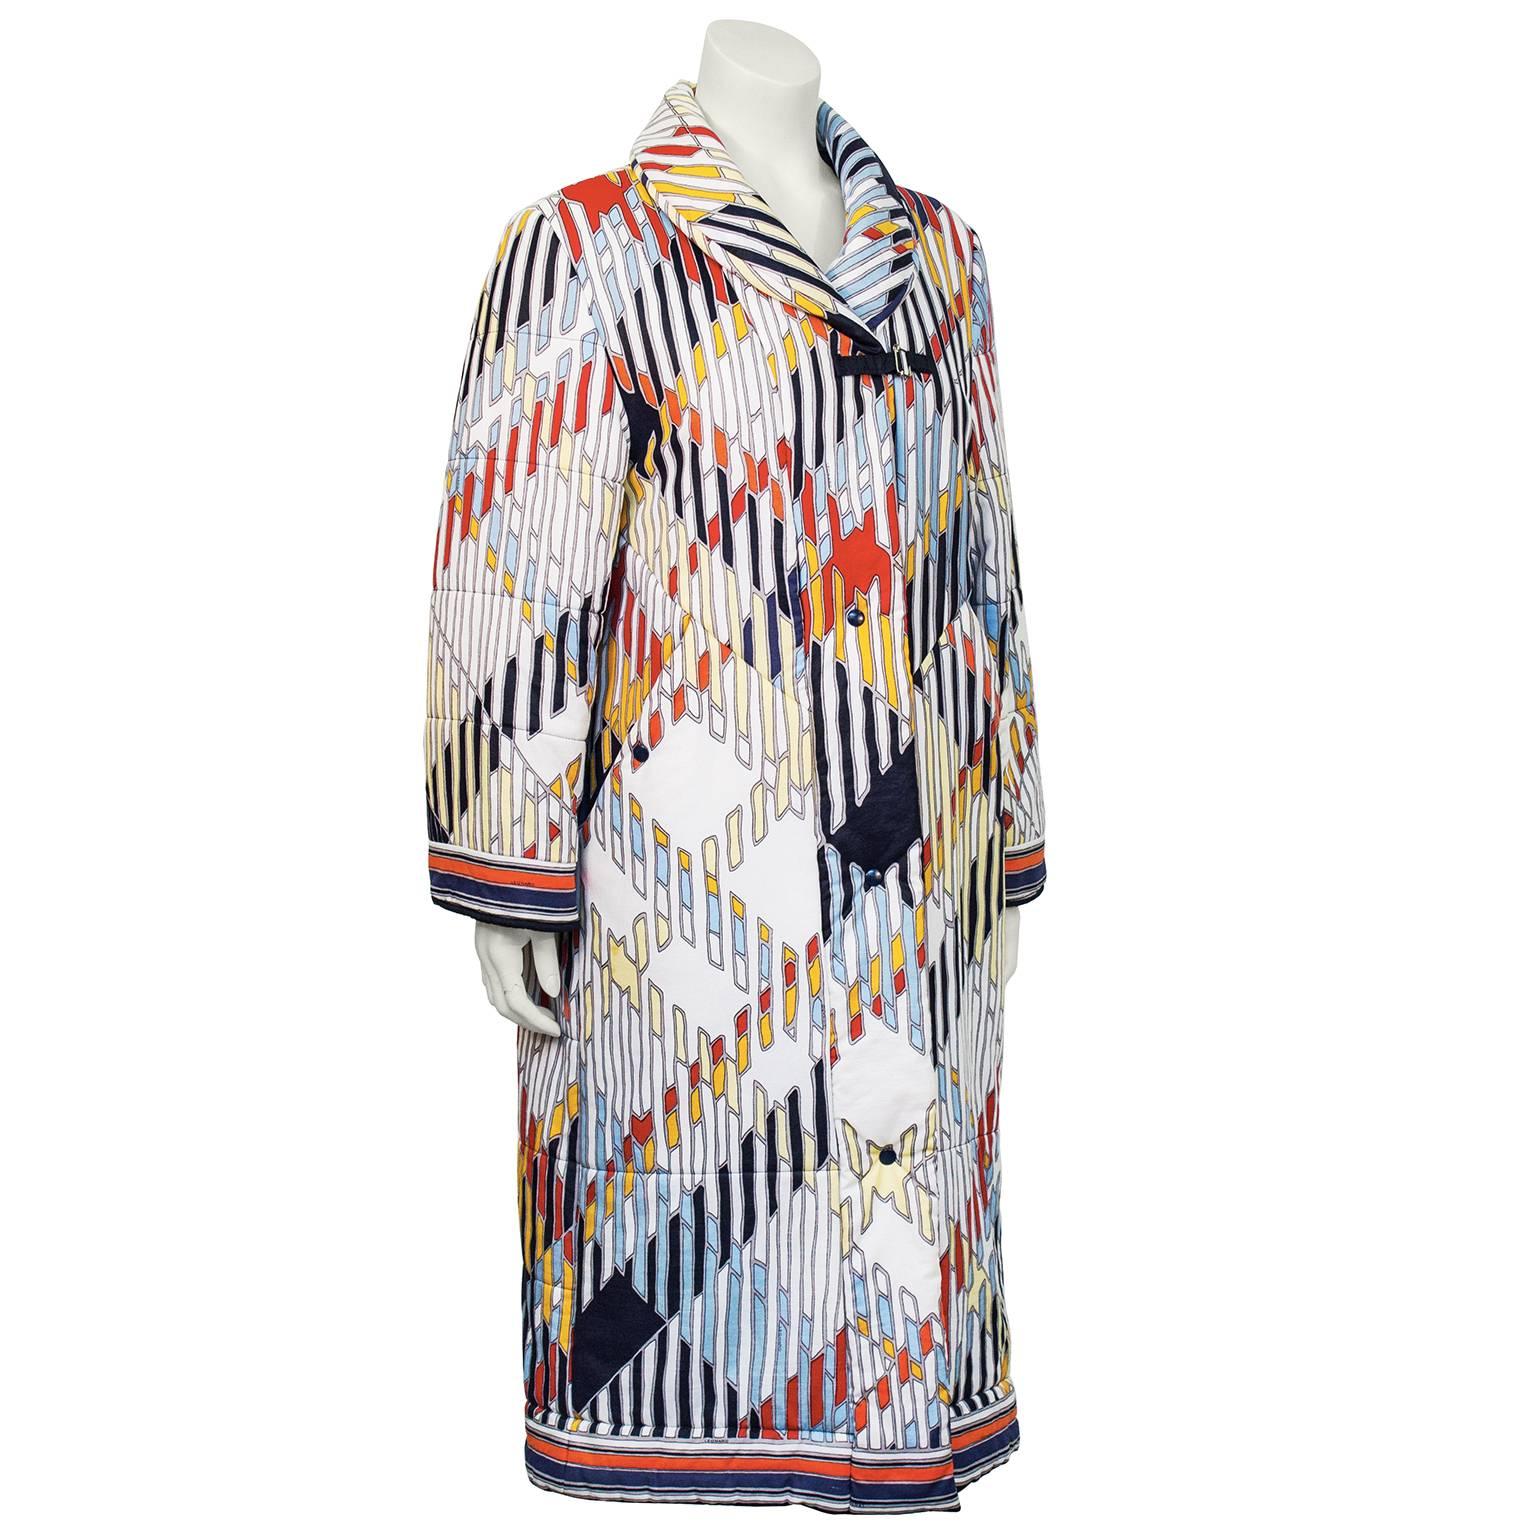 Eye catching Leonard quilted overcoat from the 1970's. In excellent condition with no signs of wear. Fastens down the front with covered snaps and a single fabric toggle below the shawl collar. Vibrant colors will warm up any fall day. Fully lined